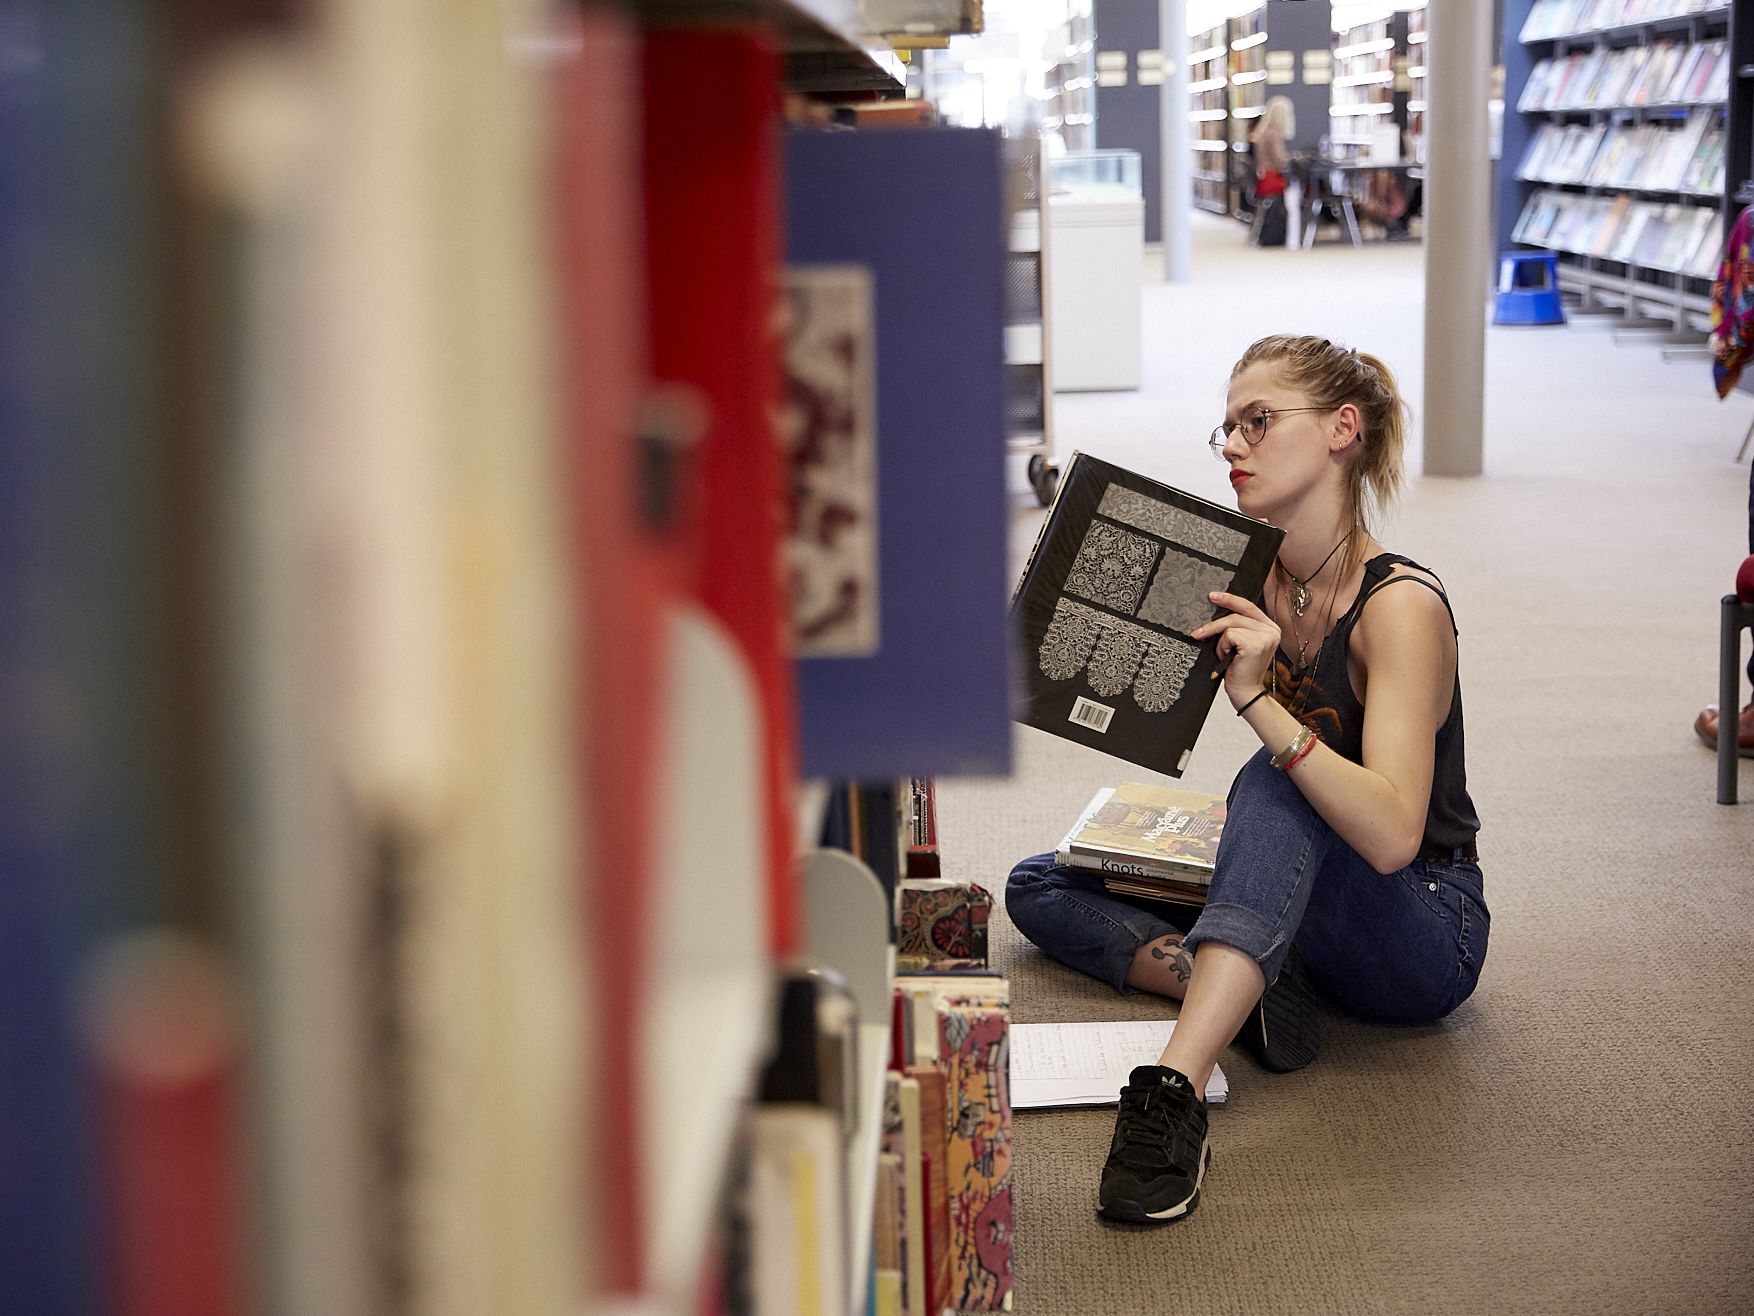 Student in the Chelsea library.